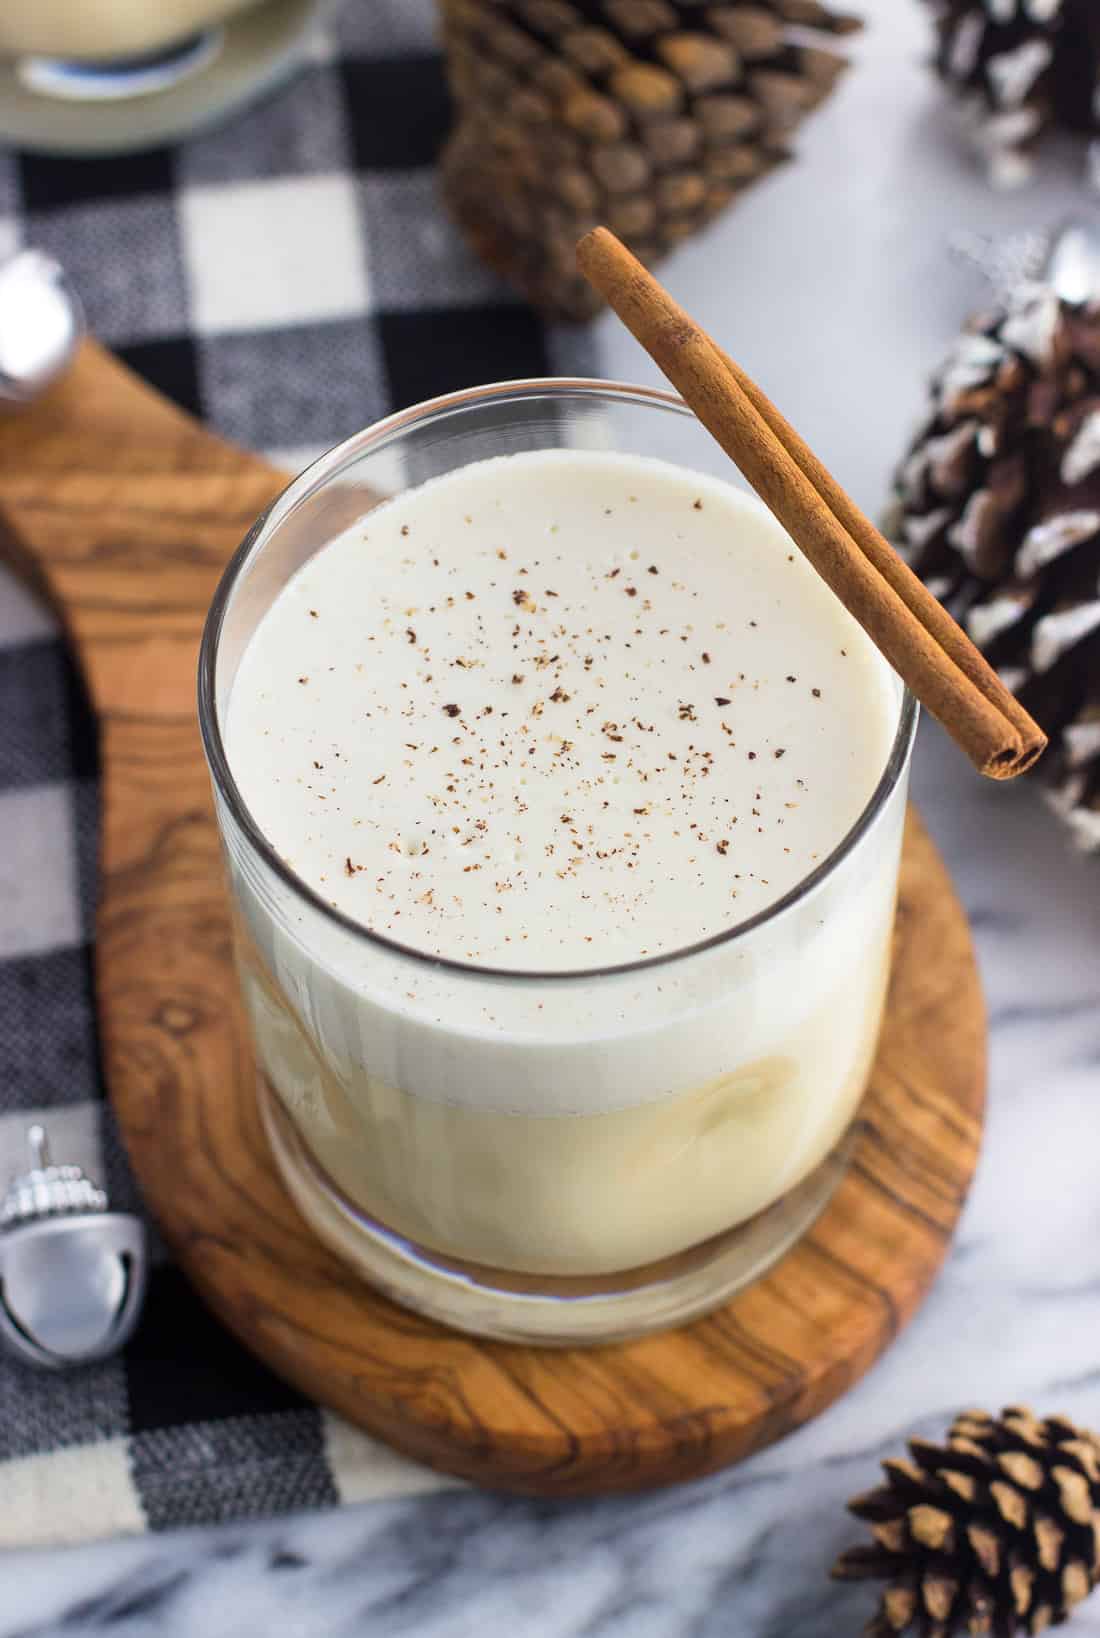 A glass of cooked eggnog on a wooden board garnished with a cinnamon stick